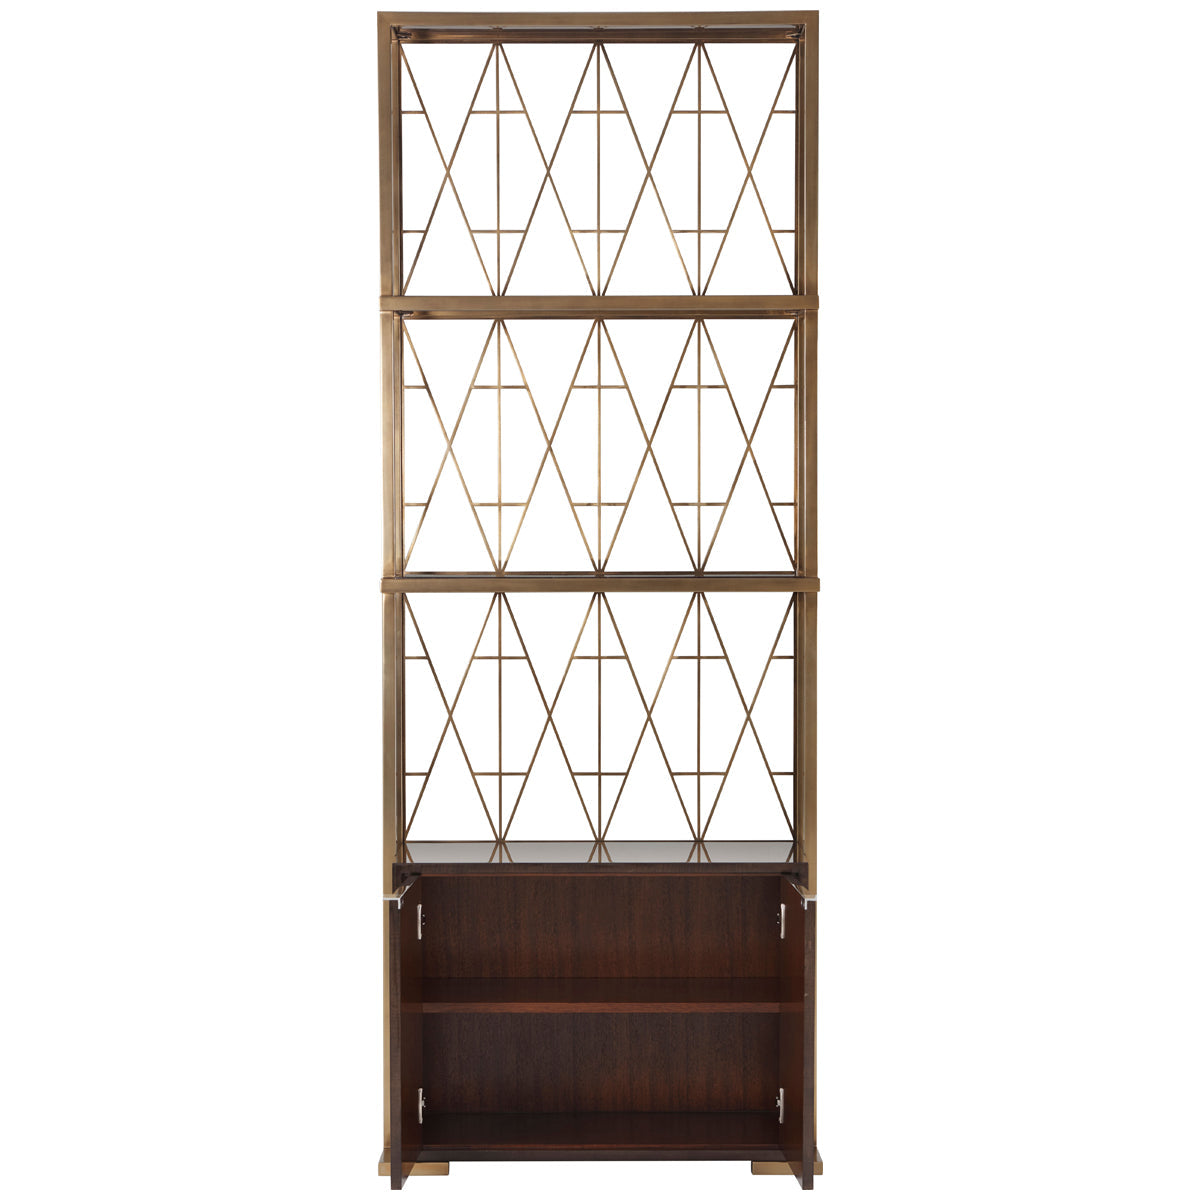 Theodore Alexander Iconic Drawer Etagere